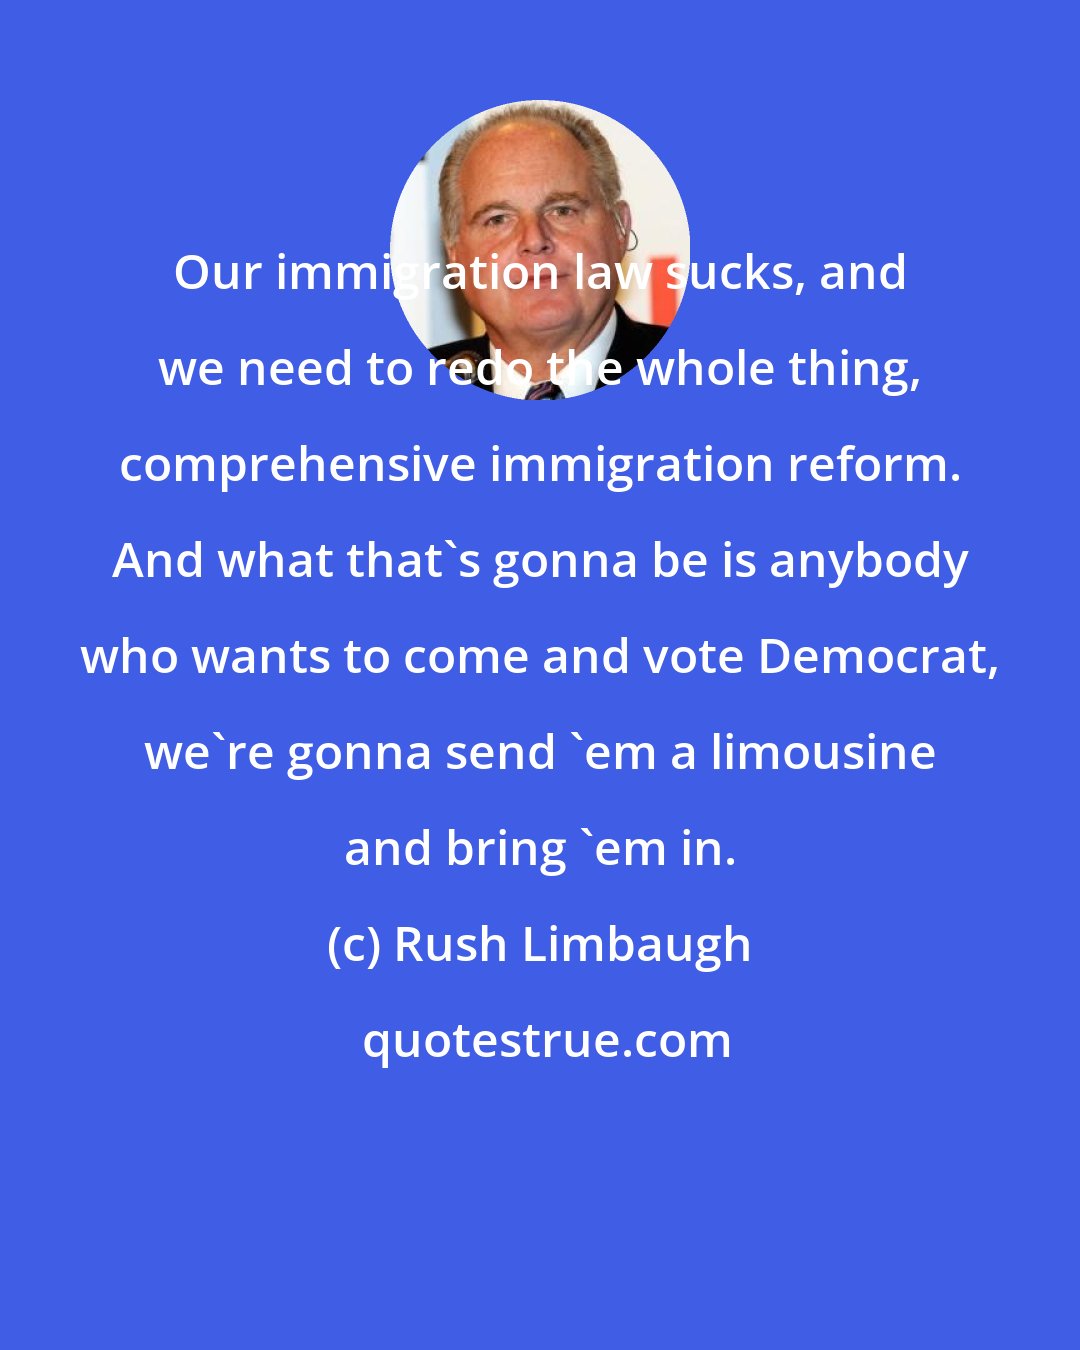 Rush Limbaugh: Our immigration law sucks, and we need to redo the whole thing, comprehensive immigration reform. And what that's gonna be is anybody who wants to come and vote Democrat, we're gonna send 'em a limousine and bring 'em in.